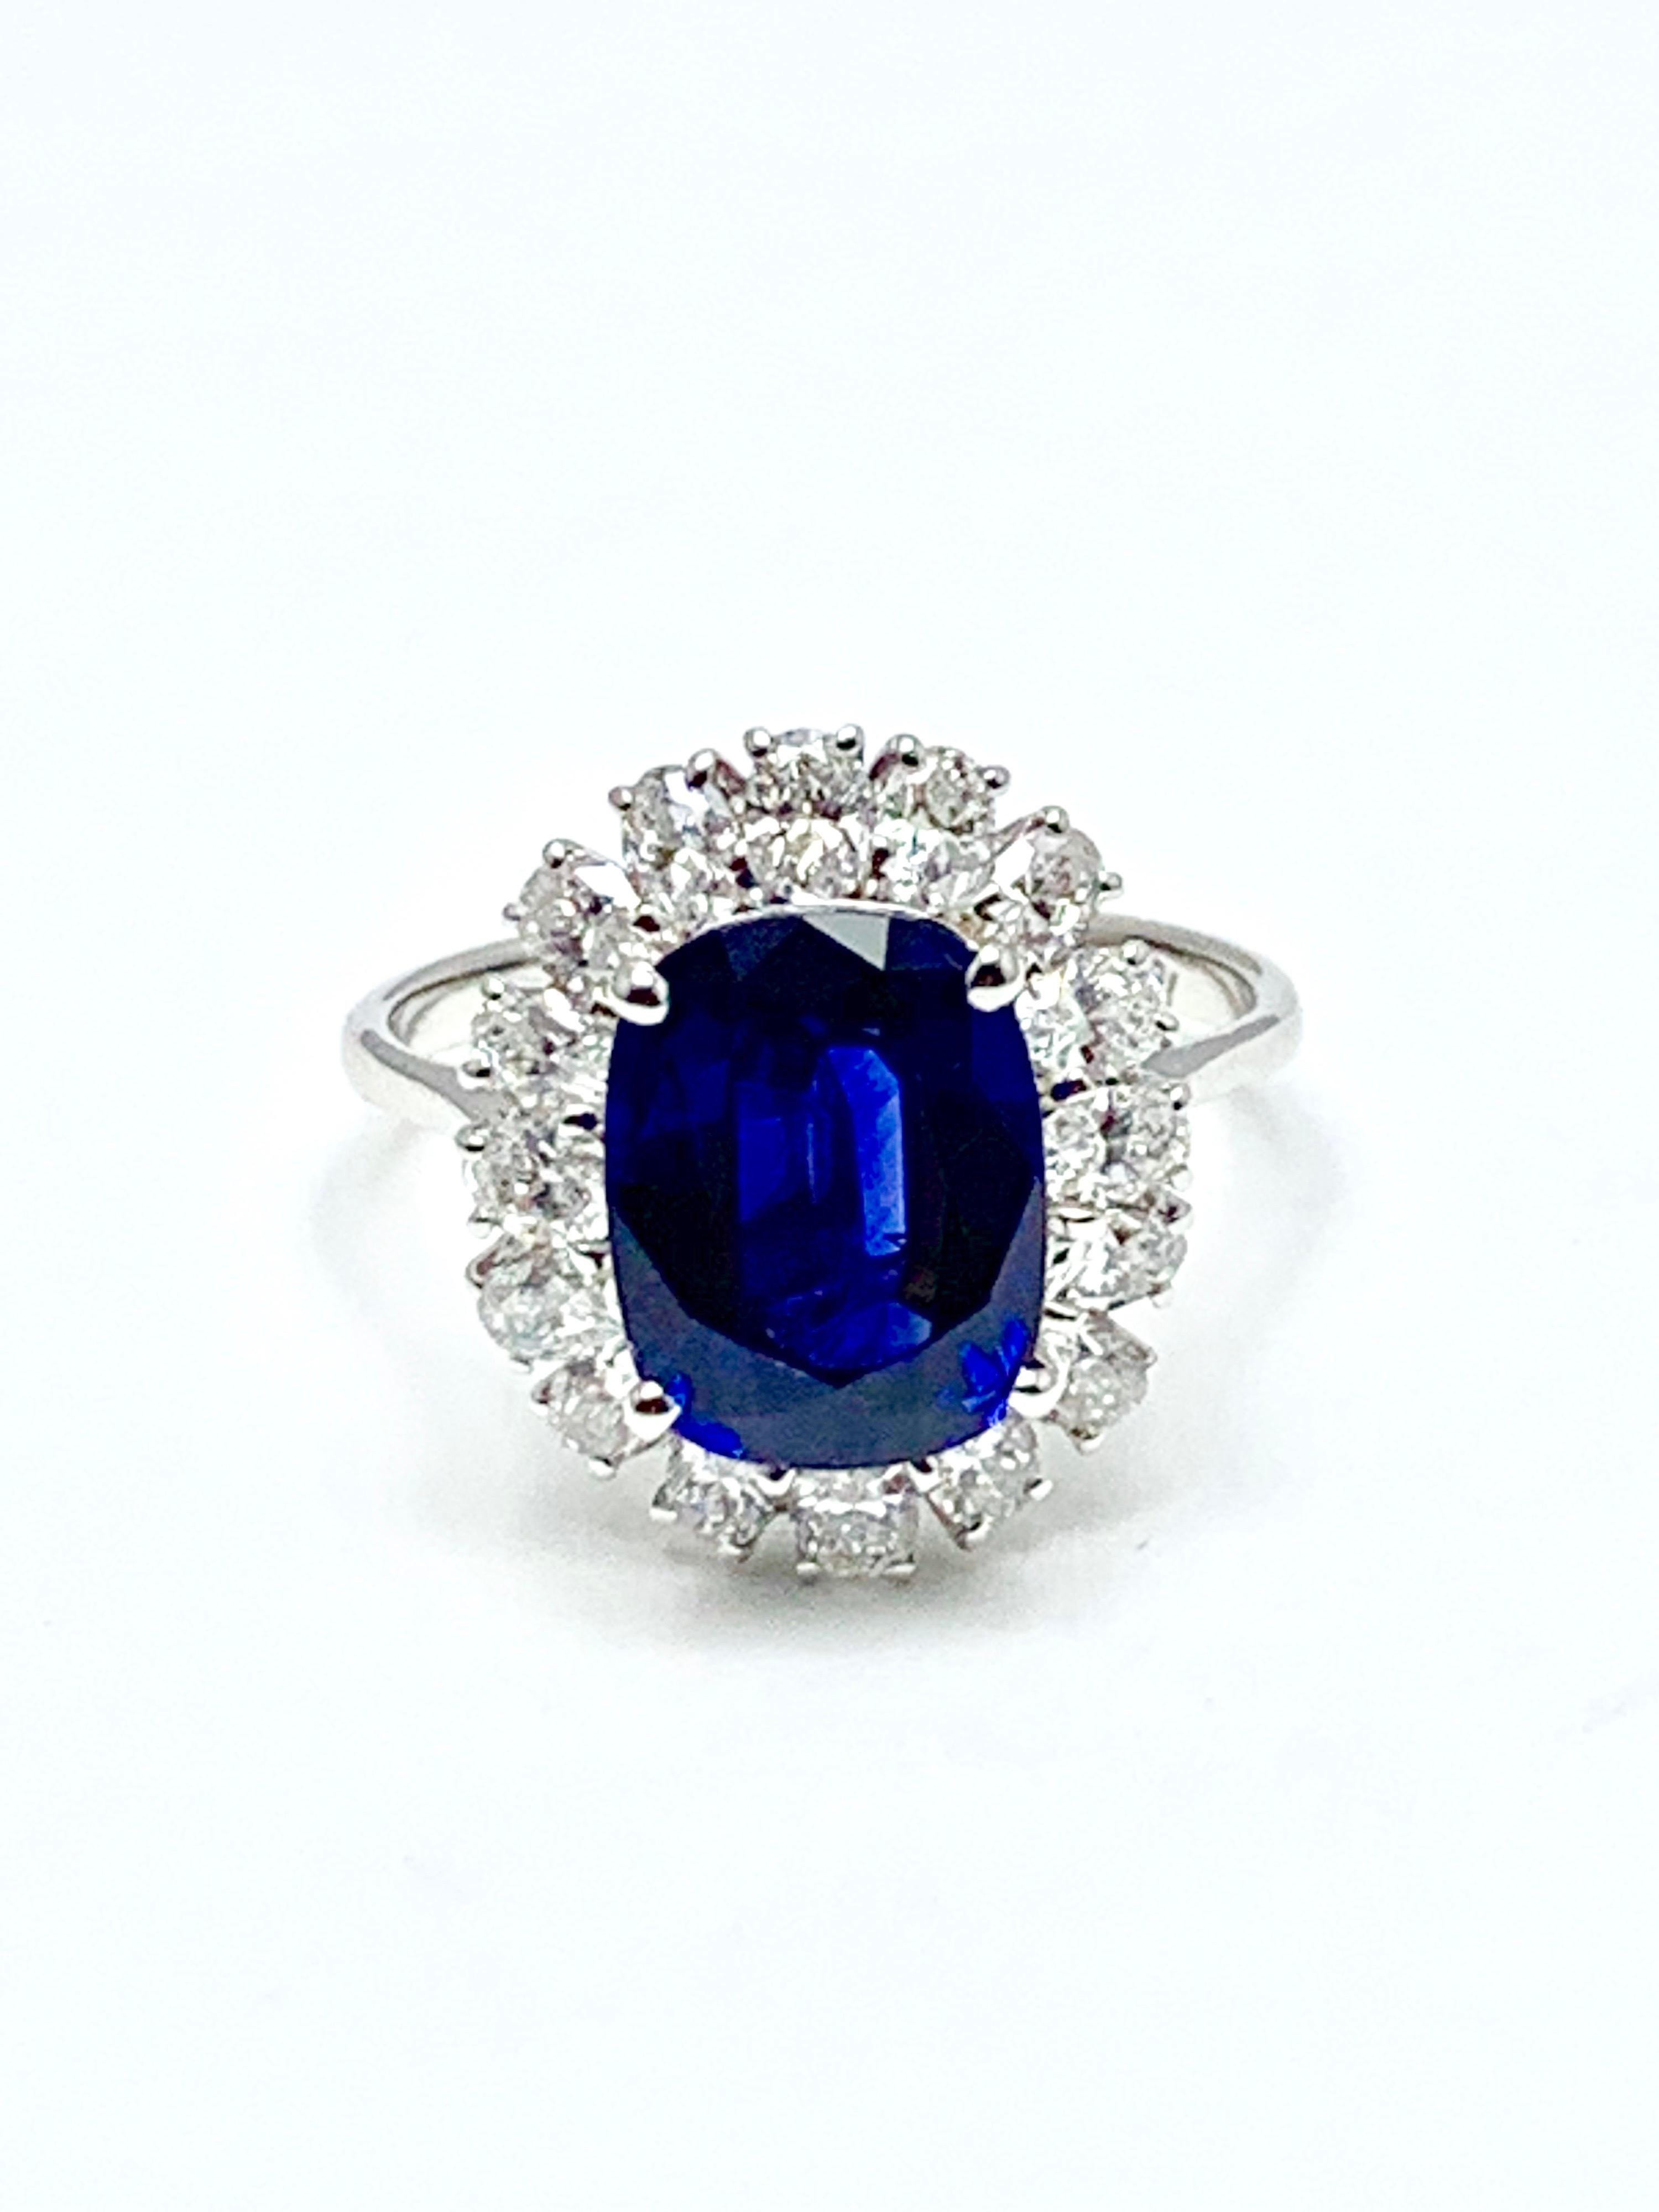 A stunning 4.60 carat cushion mixed cut Sapphire and diamond cocktail ring set in 18 karat white gold.  The Sapphire is prong set with 16 oval brilliant Diamonds surrounding, consisting of 1.28 carats total weight.  The Sapphire has bee graded by